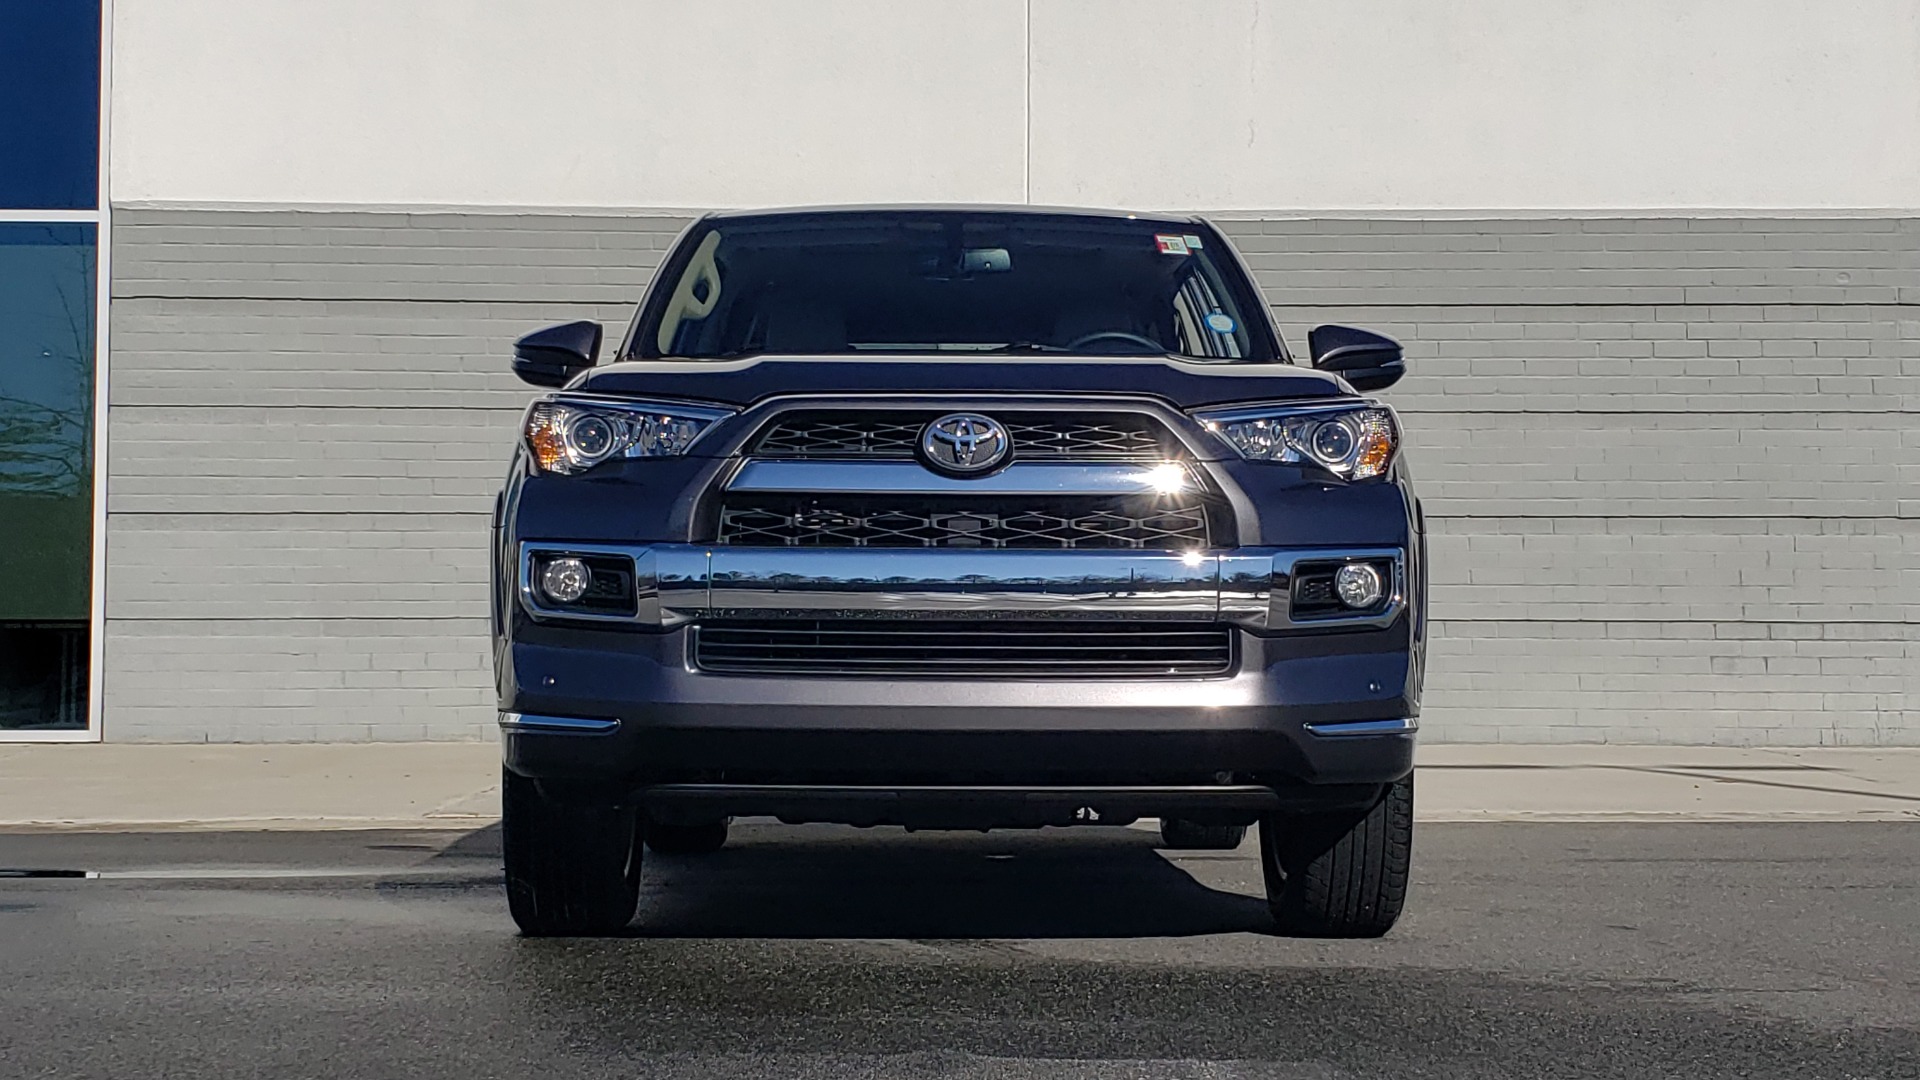 Used 2018 Toyota 4RUNNER LIMITED 4X4 / 4.0 V6 / AUTO / NAV / SUNROOF / REARVIEW for sale Sold at Formula Imports in Charlotte NC 28227 25